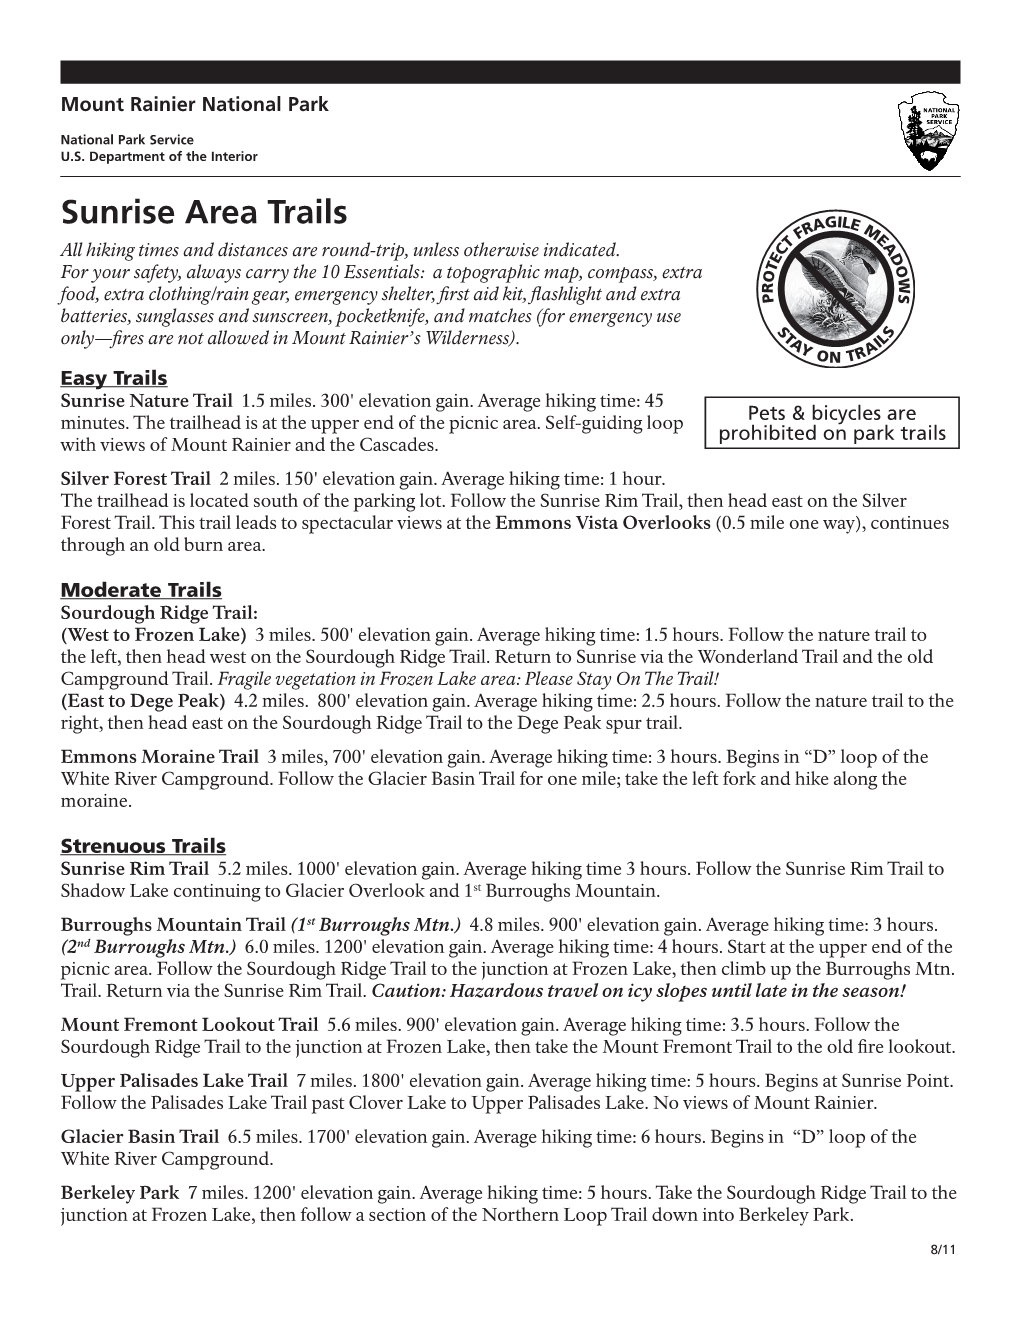 Sunrise Area Trails All Hiking Times and Distances Are Round-Trip, Unless Otherwise Indicated